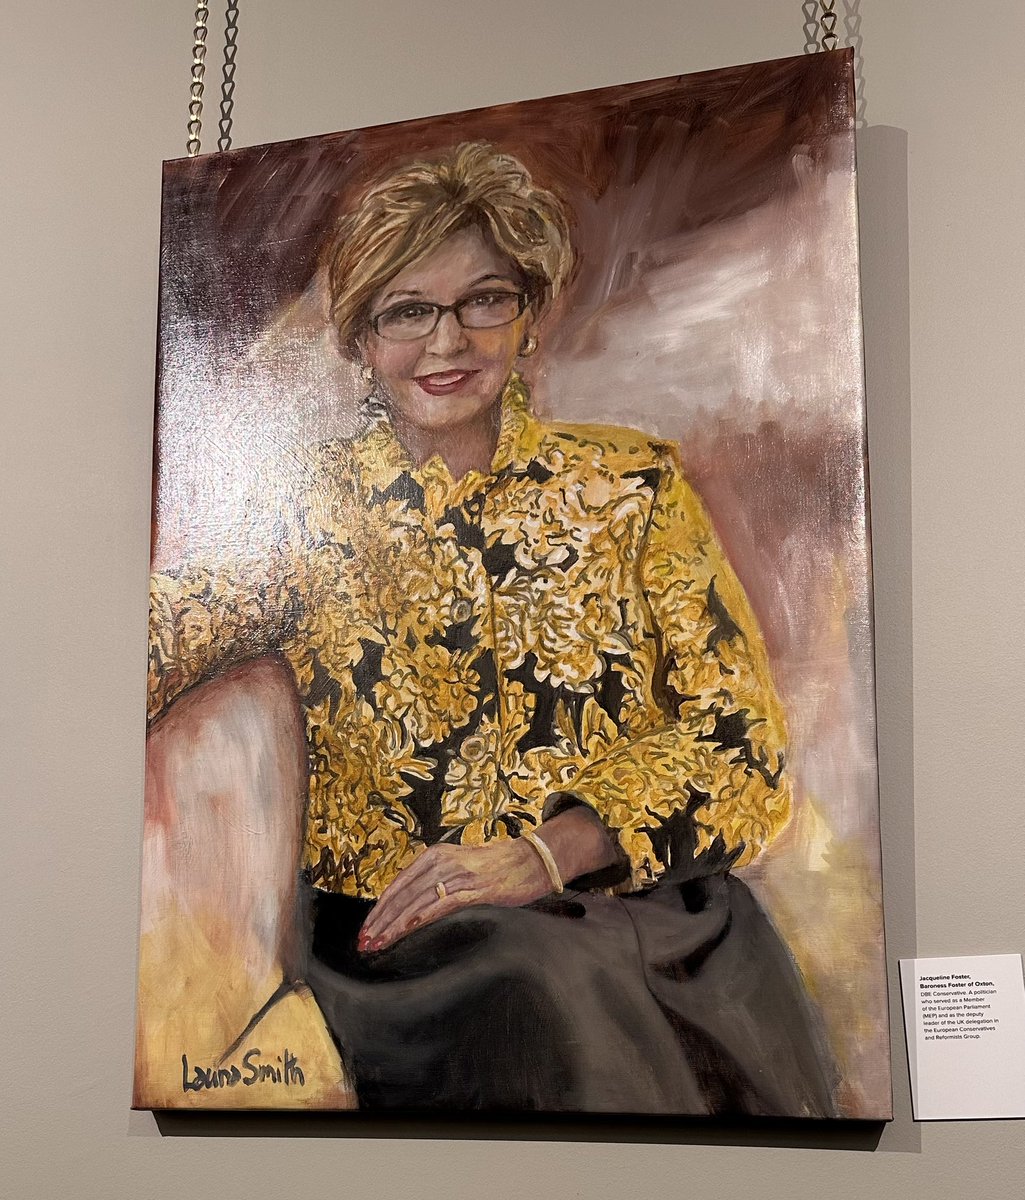 Went for a lovely walk around @BlenheimPalace today and saw this wonderful painting of Baroness @jfoster2019 in the Café 

@MichelleDewbs @GBNEWS